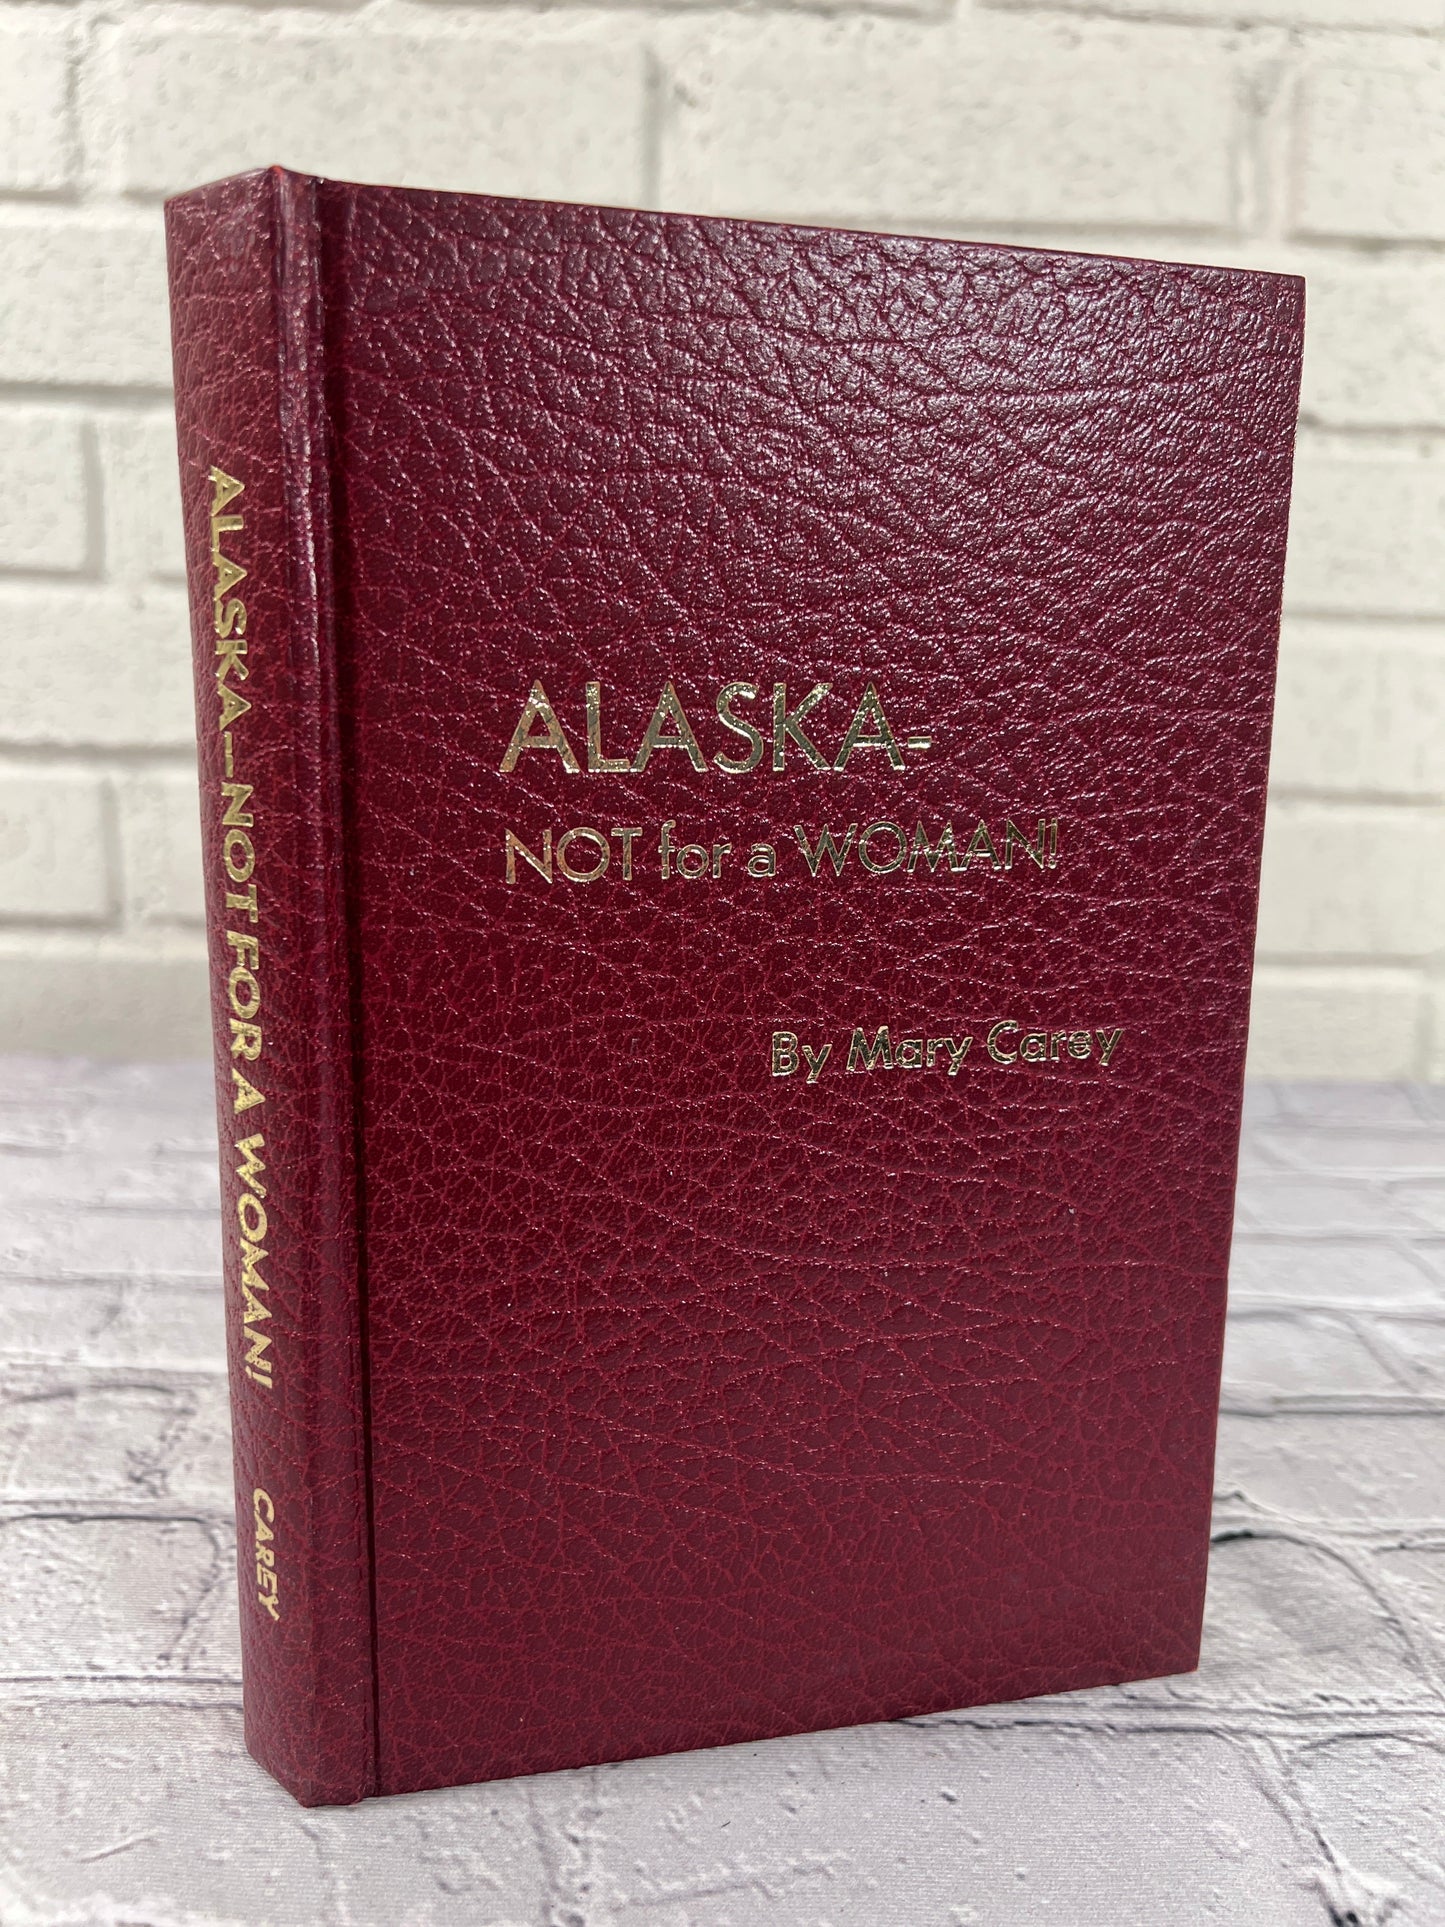 Alaska - Not for a Woman by Mary Carey [Signed · 1980]